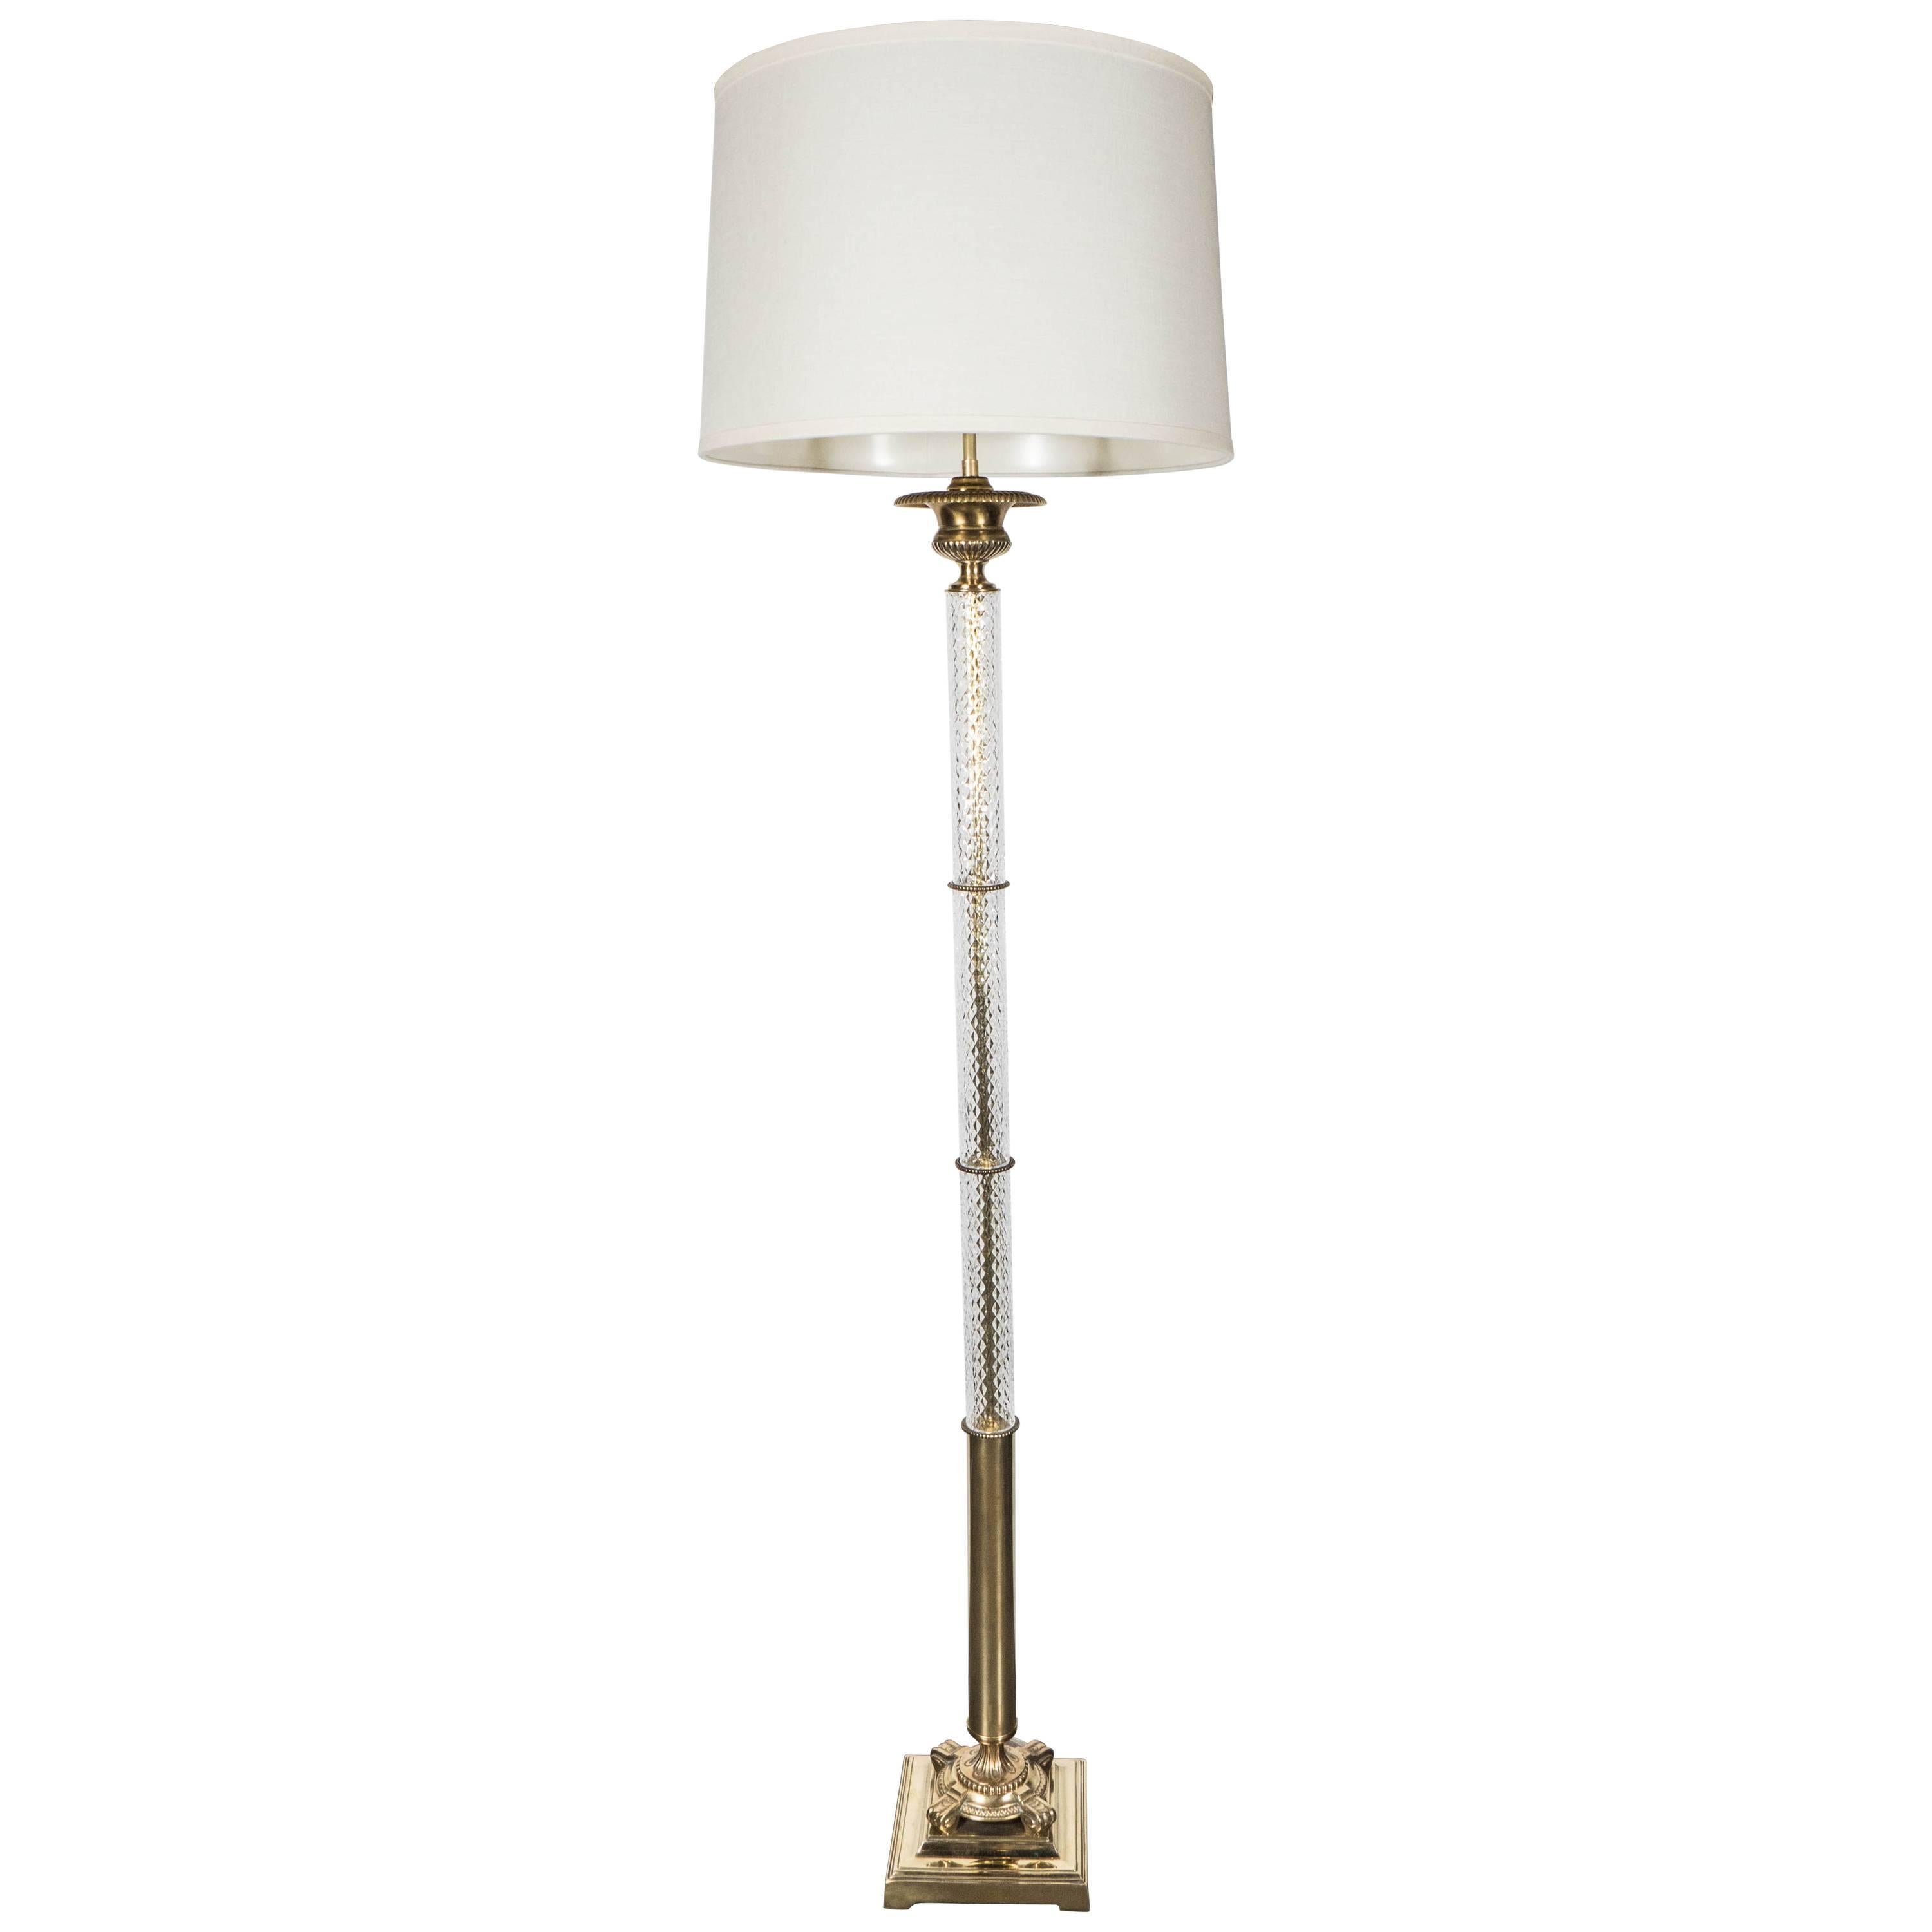 Stunning Art Deco Brass and Glass Floor Lamp with Neoclassical Details